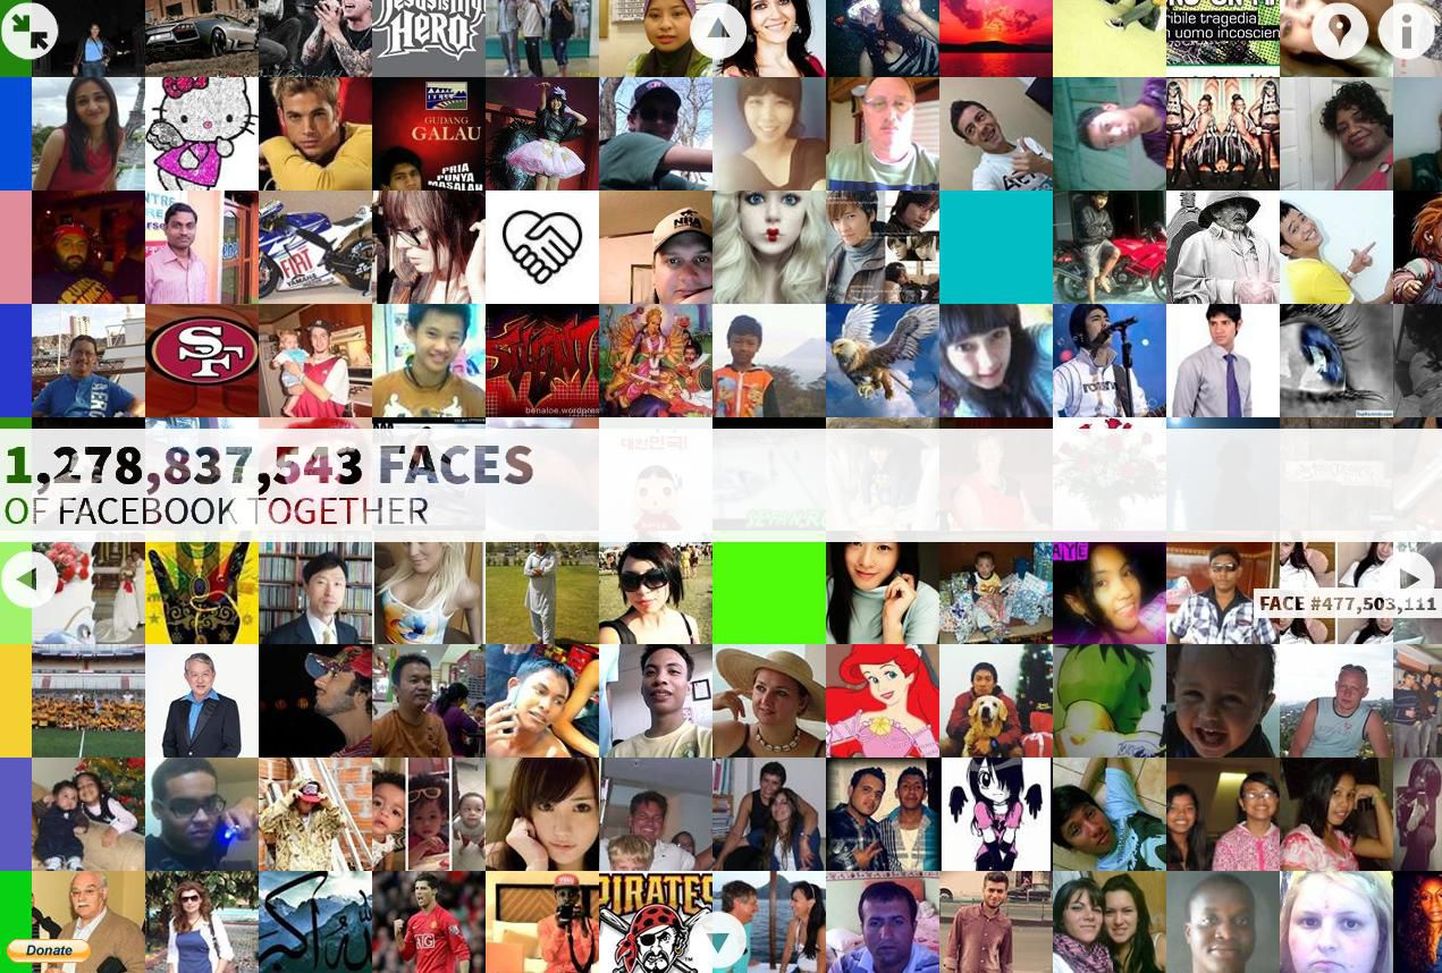 The Faces of Facebook